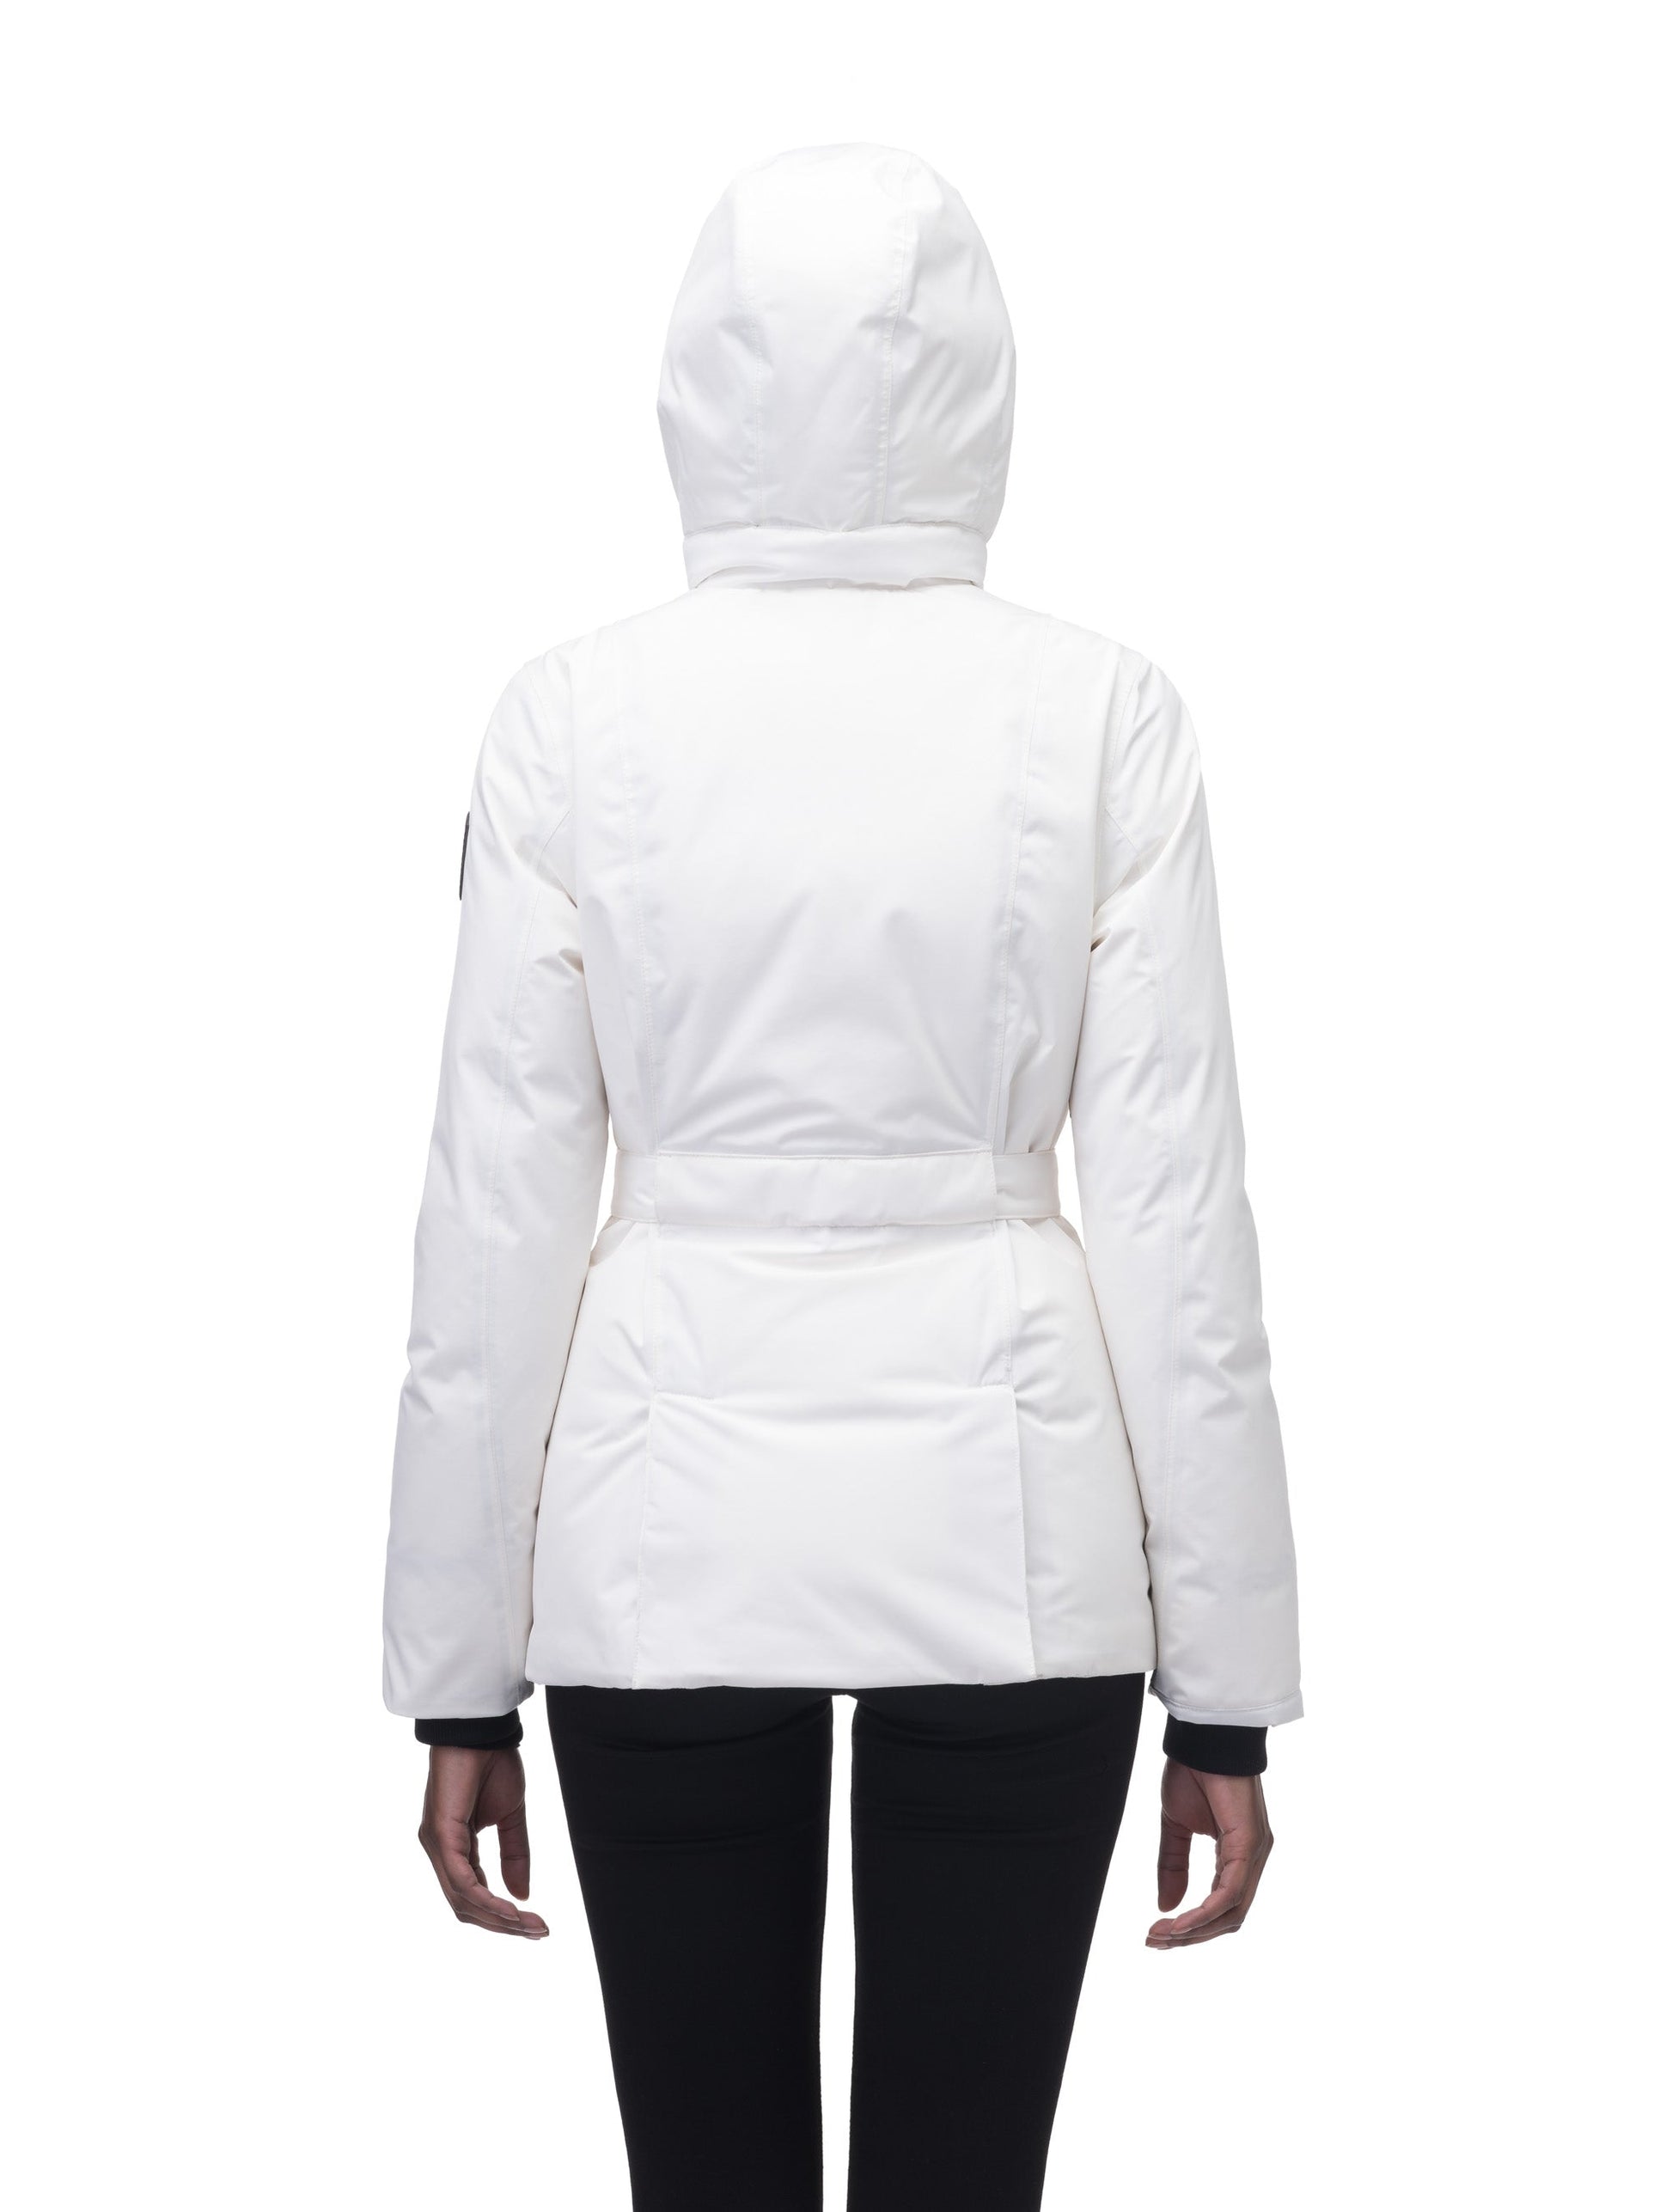 Ladies hip length down-filled parka with non-removable hood and adjustable belt in Chalk